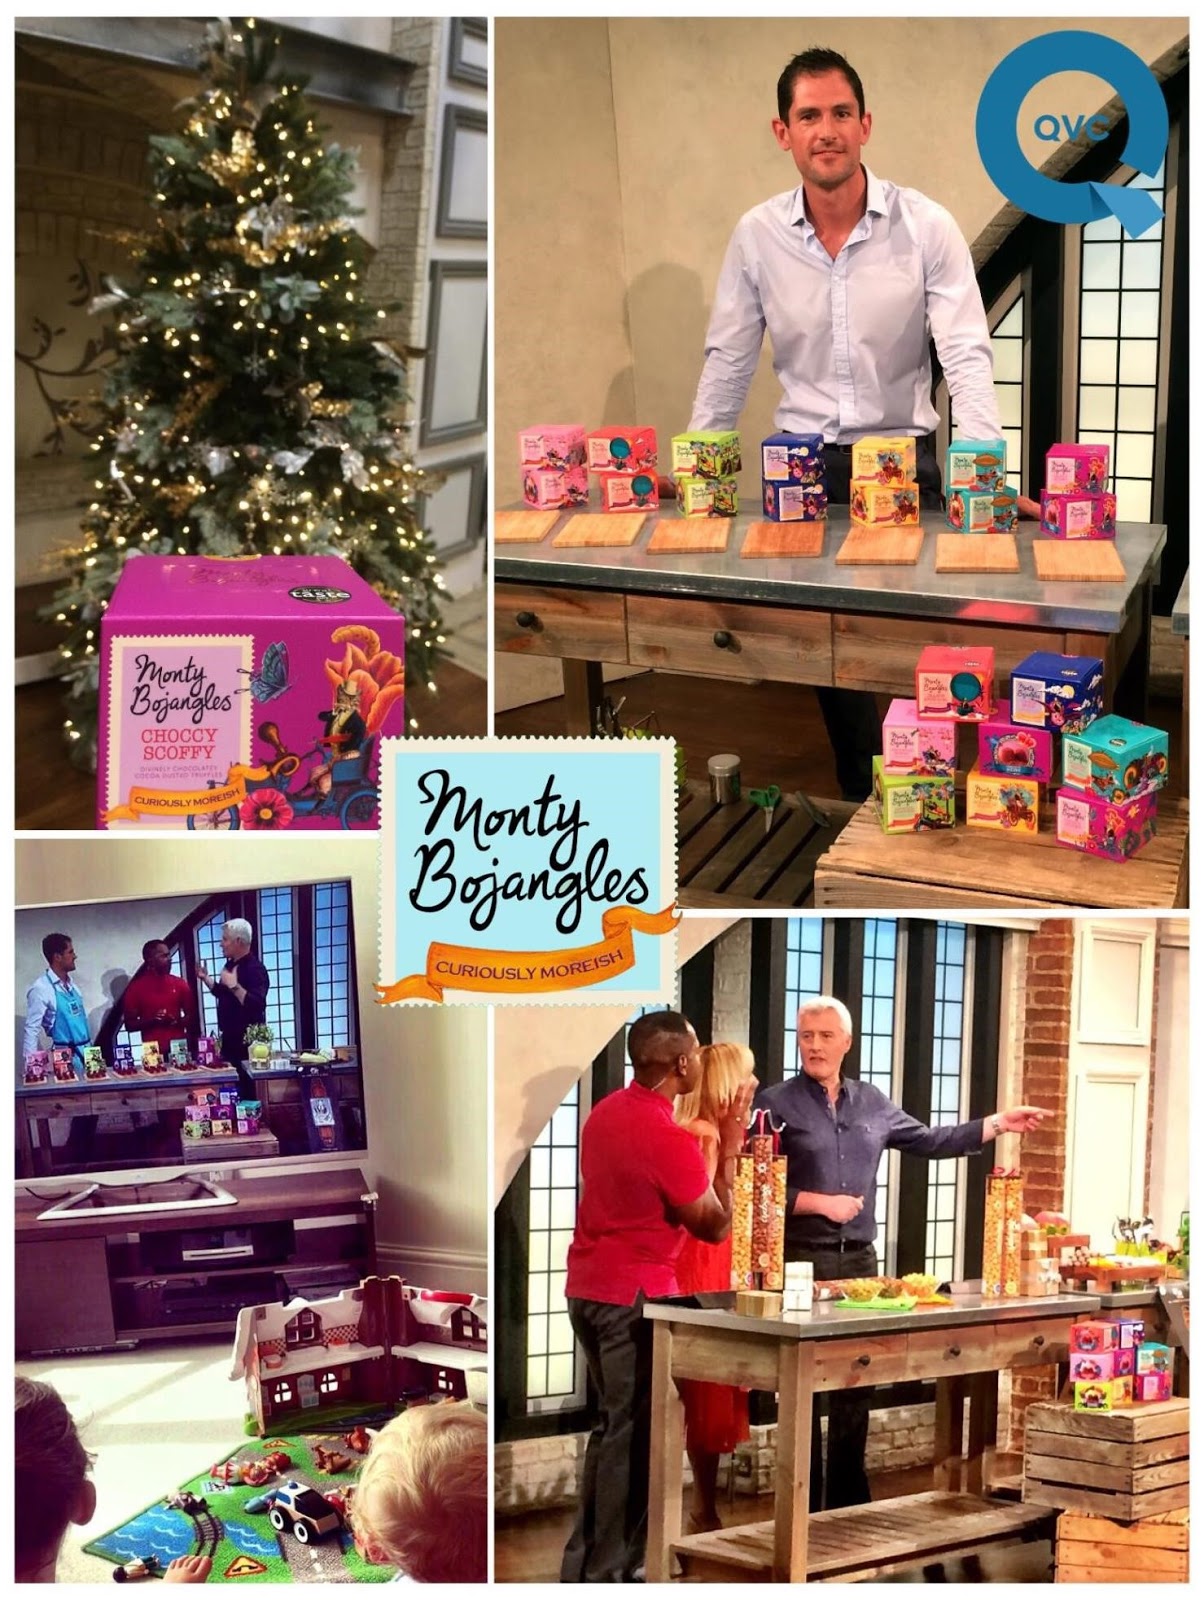 14 Qvc In The Kitchen Monty Bojangles steps into the QVC Kitchen with Andi Peters Dale  Qvc,In,The,Kitchen